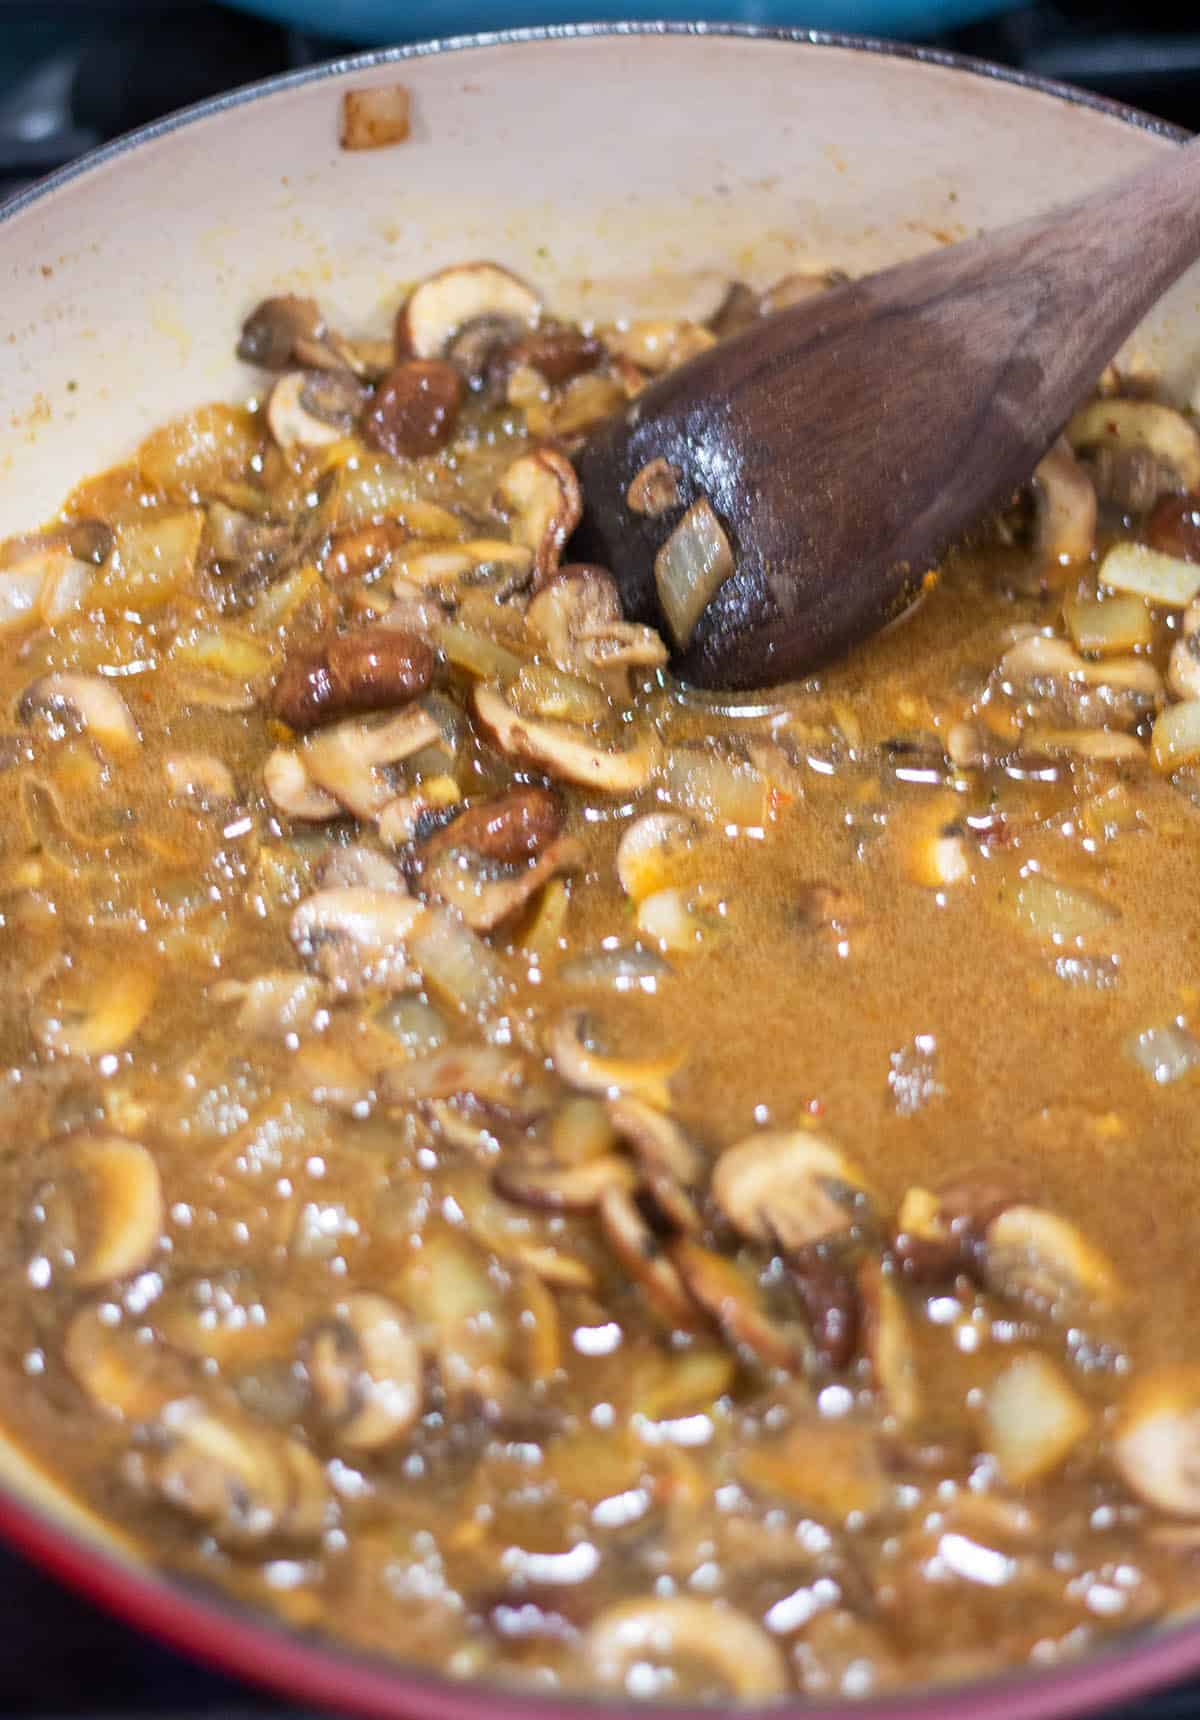 Braiser with mushrooms simmering in a vegetable broth.